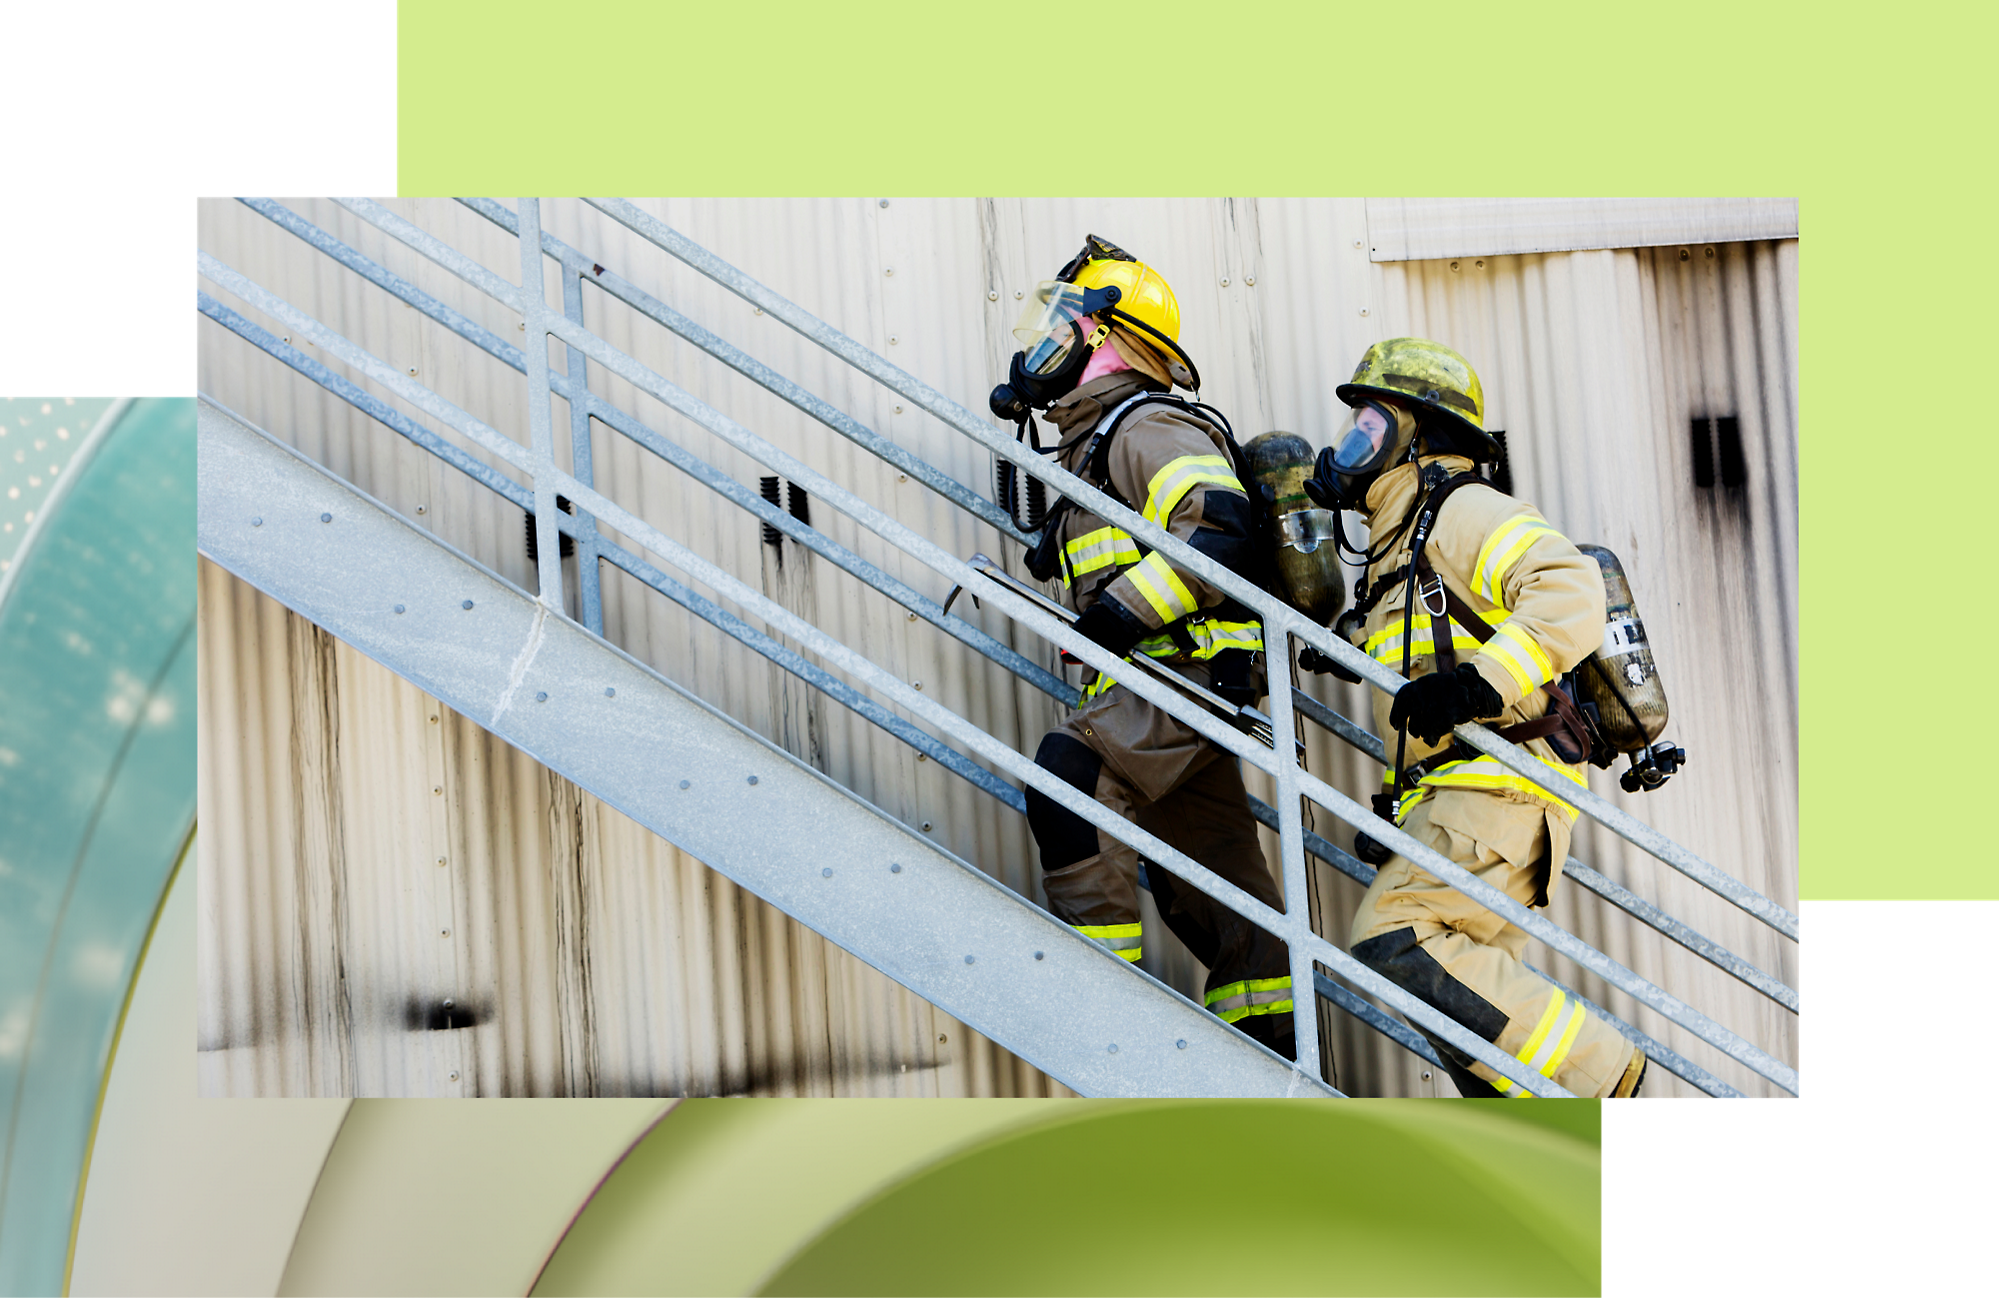 Two firefighters in full gear ascending an outdoor metal staircase during an emergency response drill.